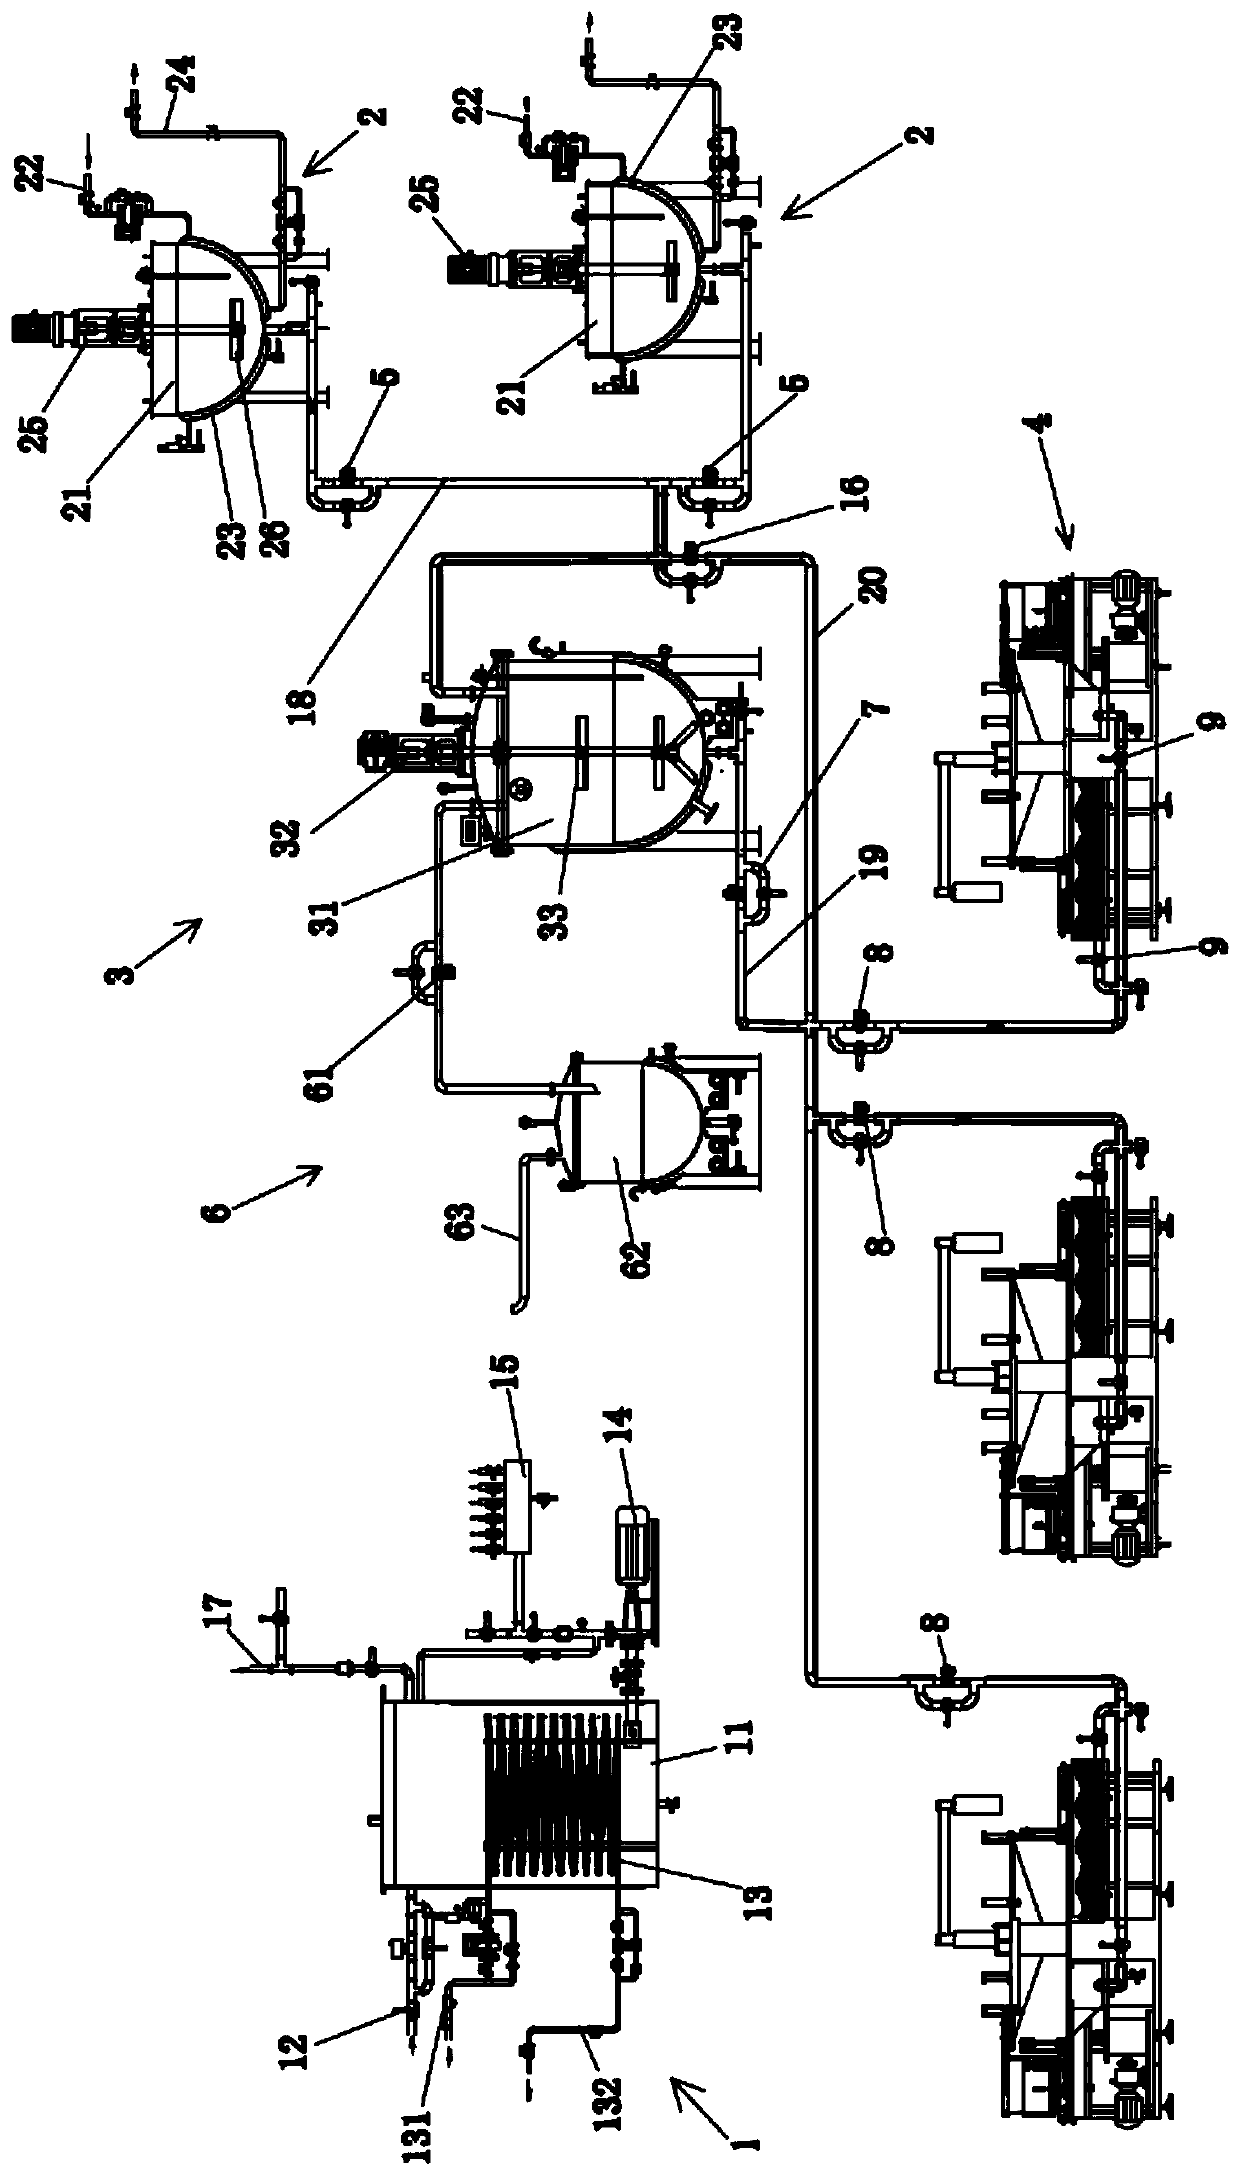 Wax liquid conveying and recycling system